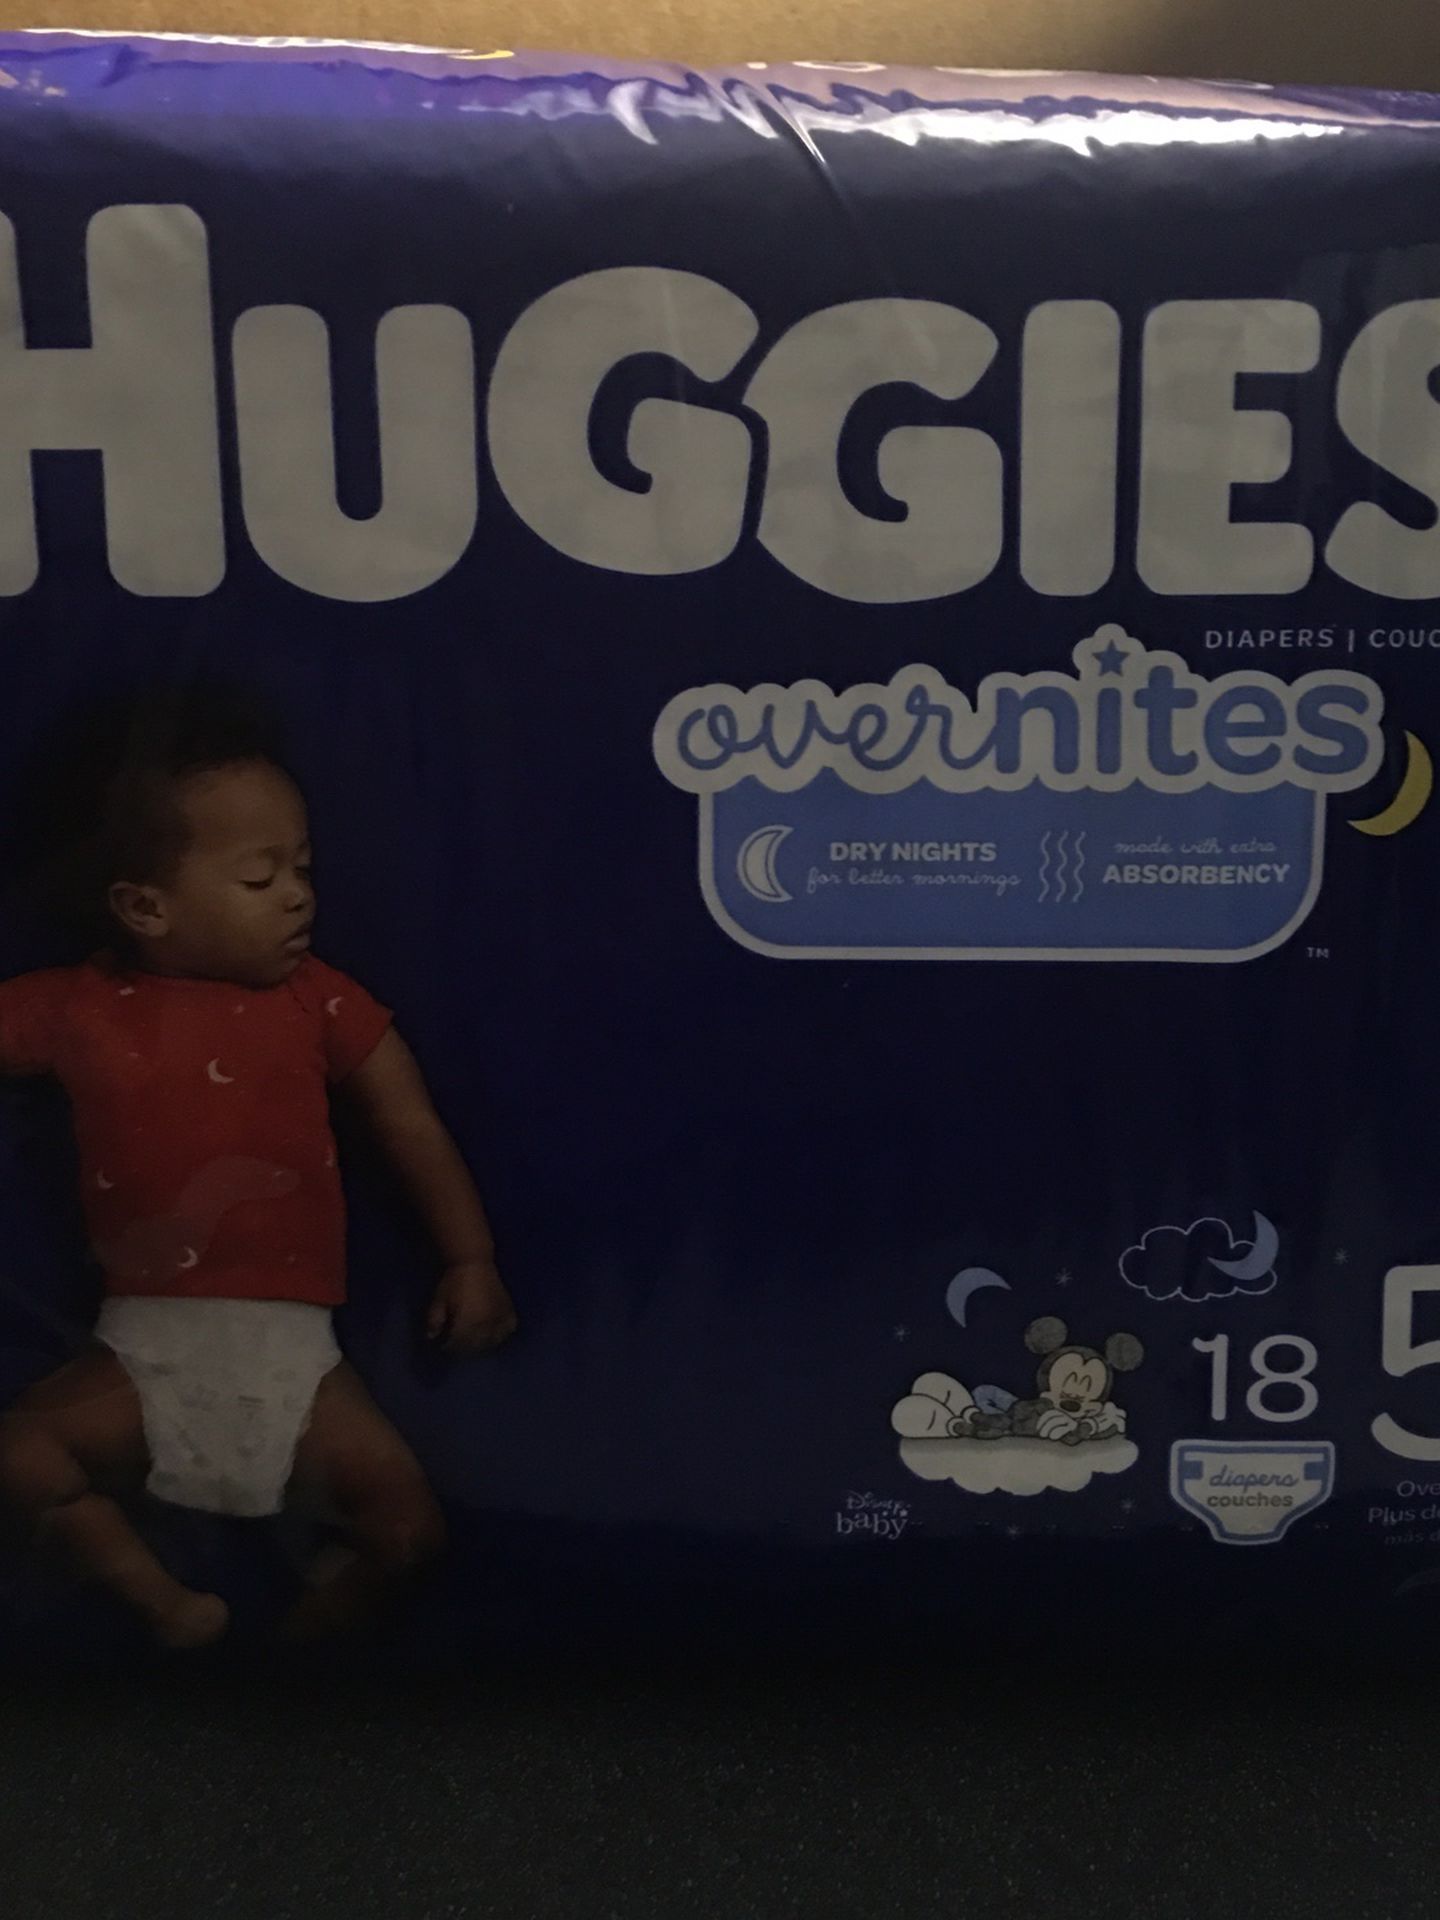 Huggies Overnites Nighttime Diapers, Size 5